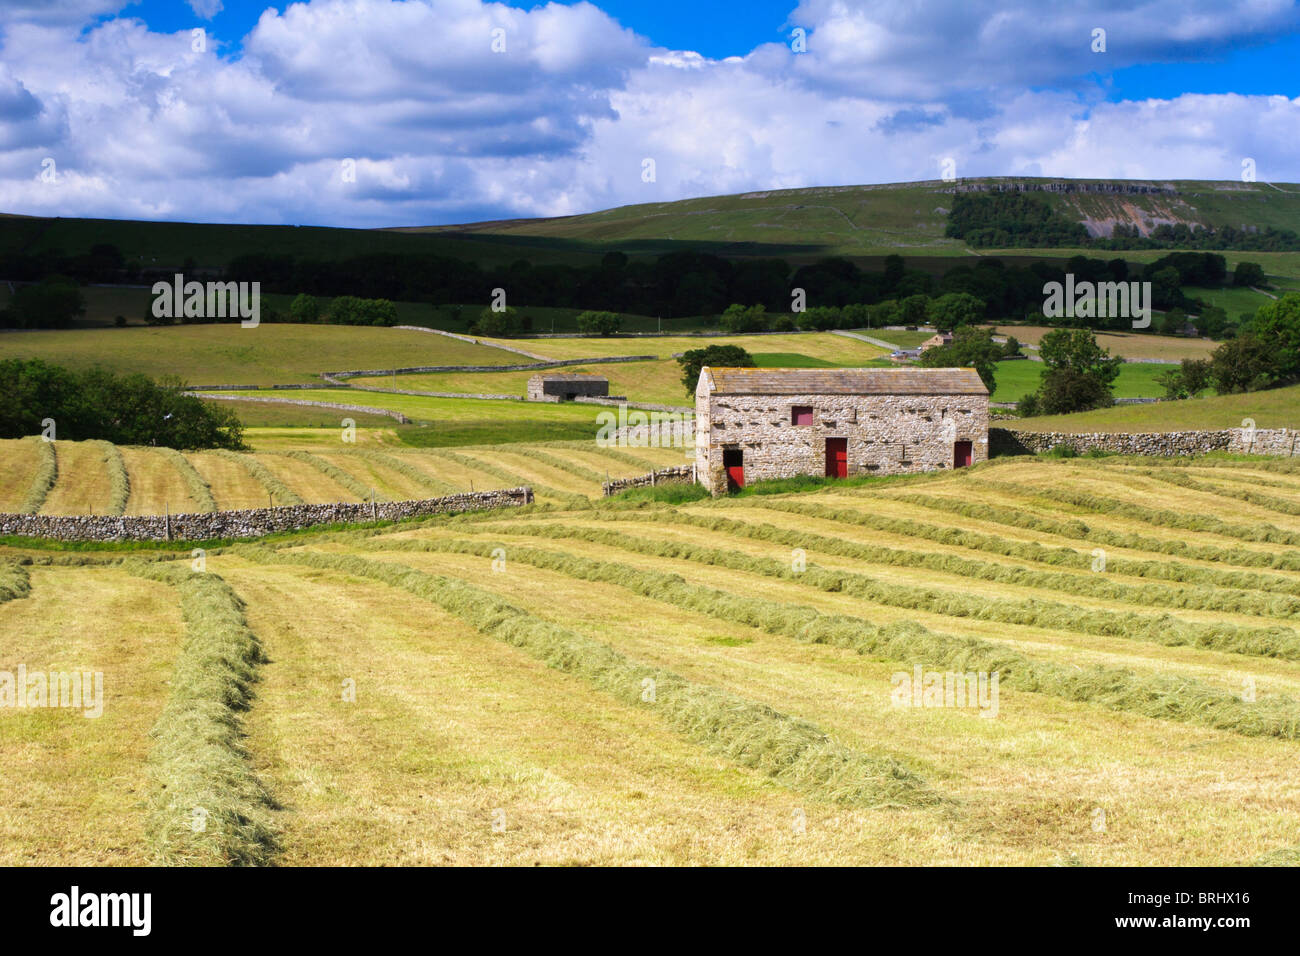 newly mown field in Wensleydale showing single barn with red doors Stock Photo